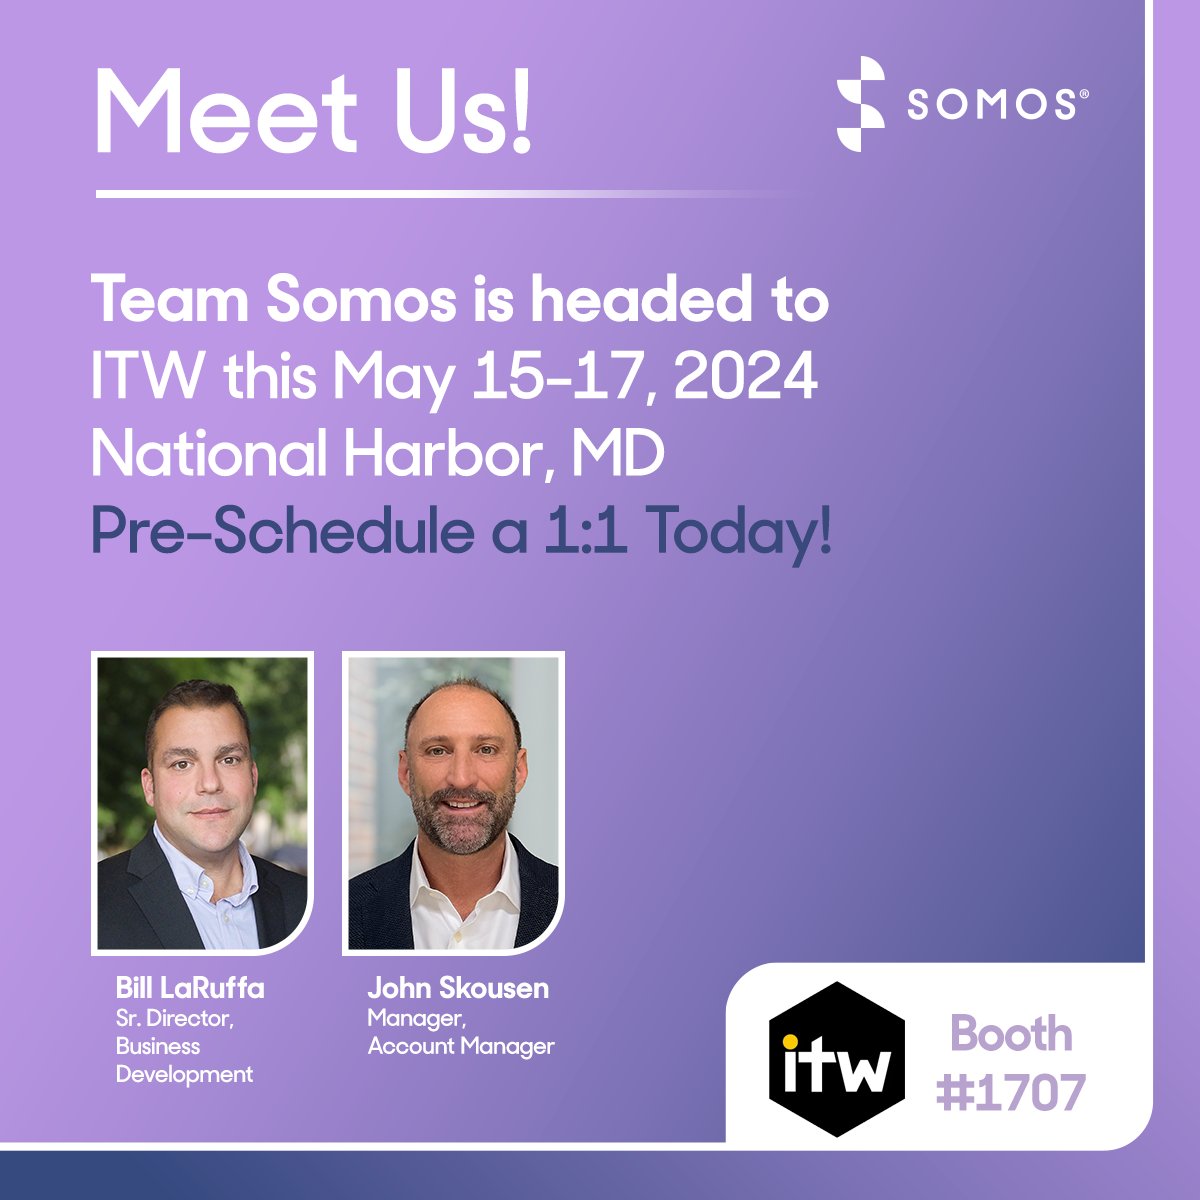 #TeamSomos is headed to the National Harbor for #ITW2024! If you're attending, we'd love to connect with you! Stop by Booth #1707 for a chat! If you'd prefer to pre-schedule a 1:1, visit calendly.com/d/2k7-vgm-pfk/… today to secure your spot. #GlobalConnectivity